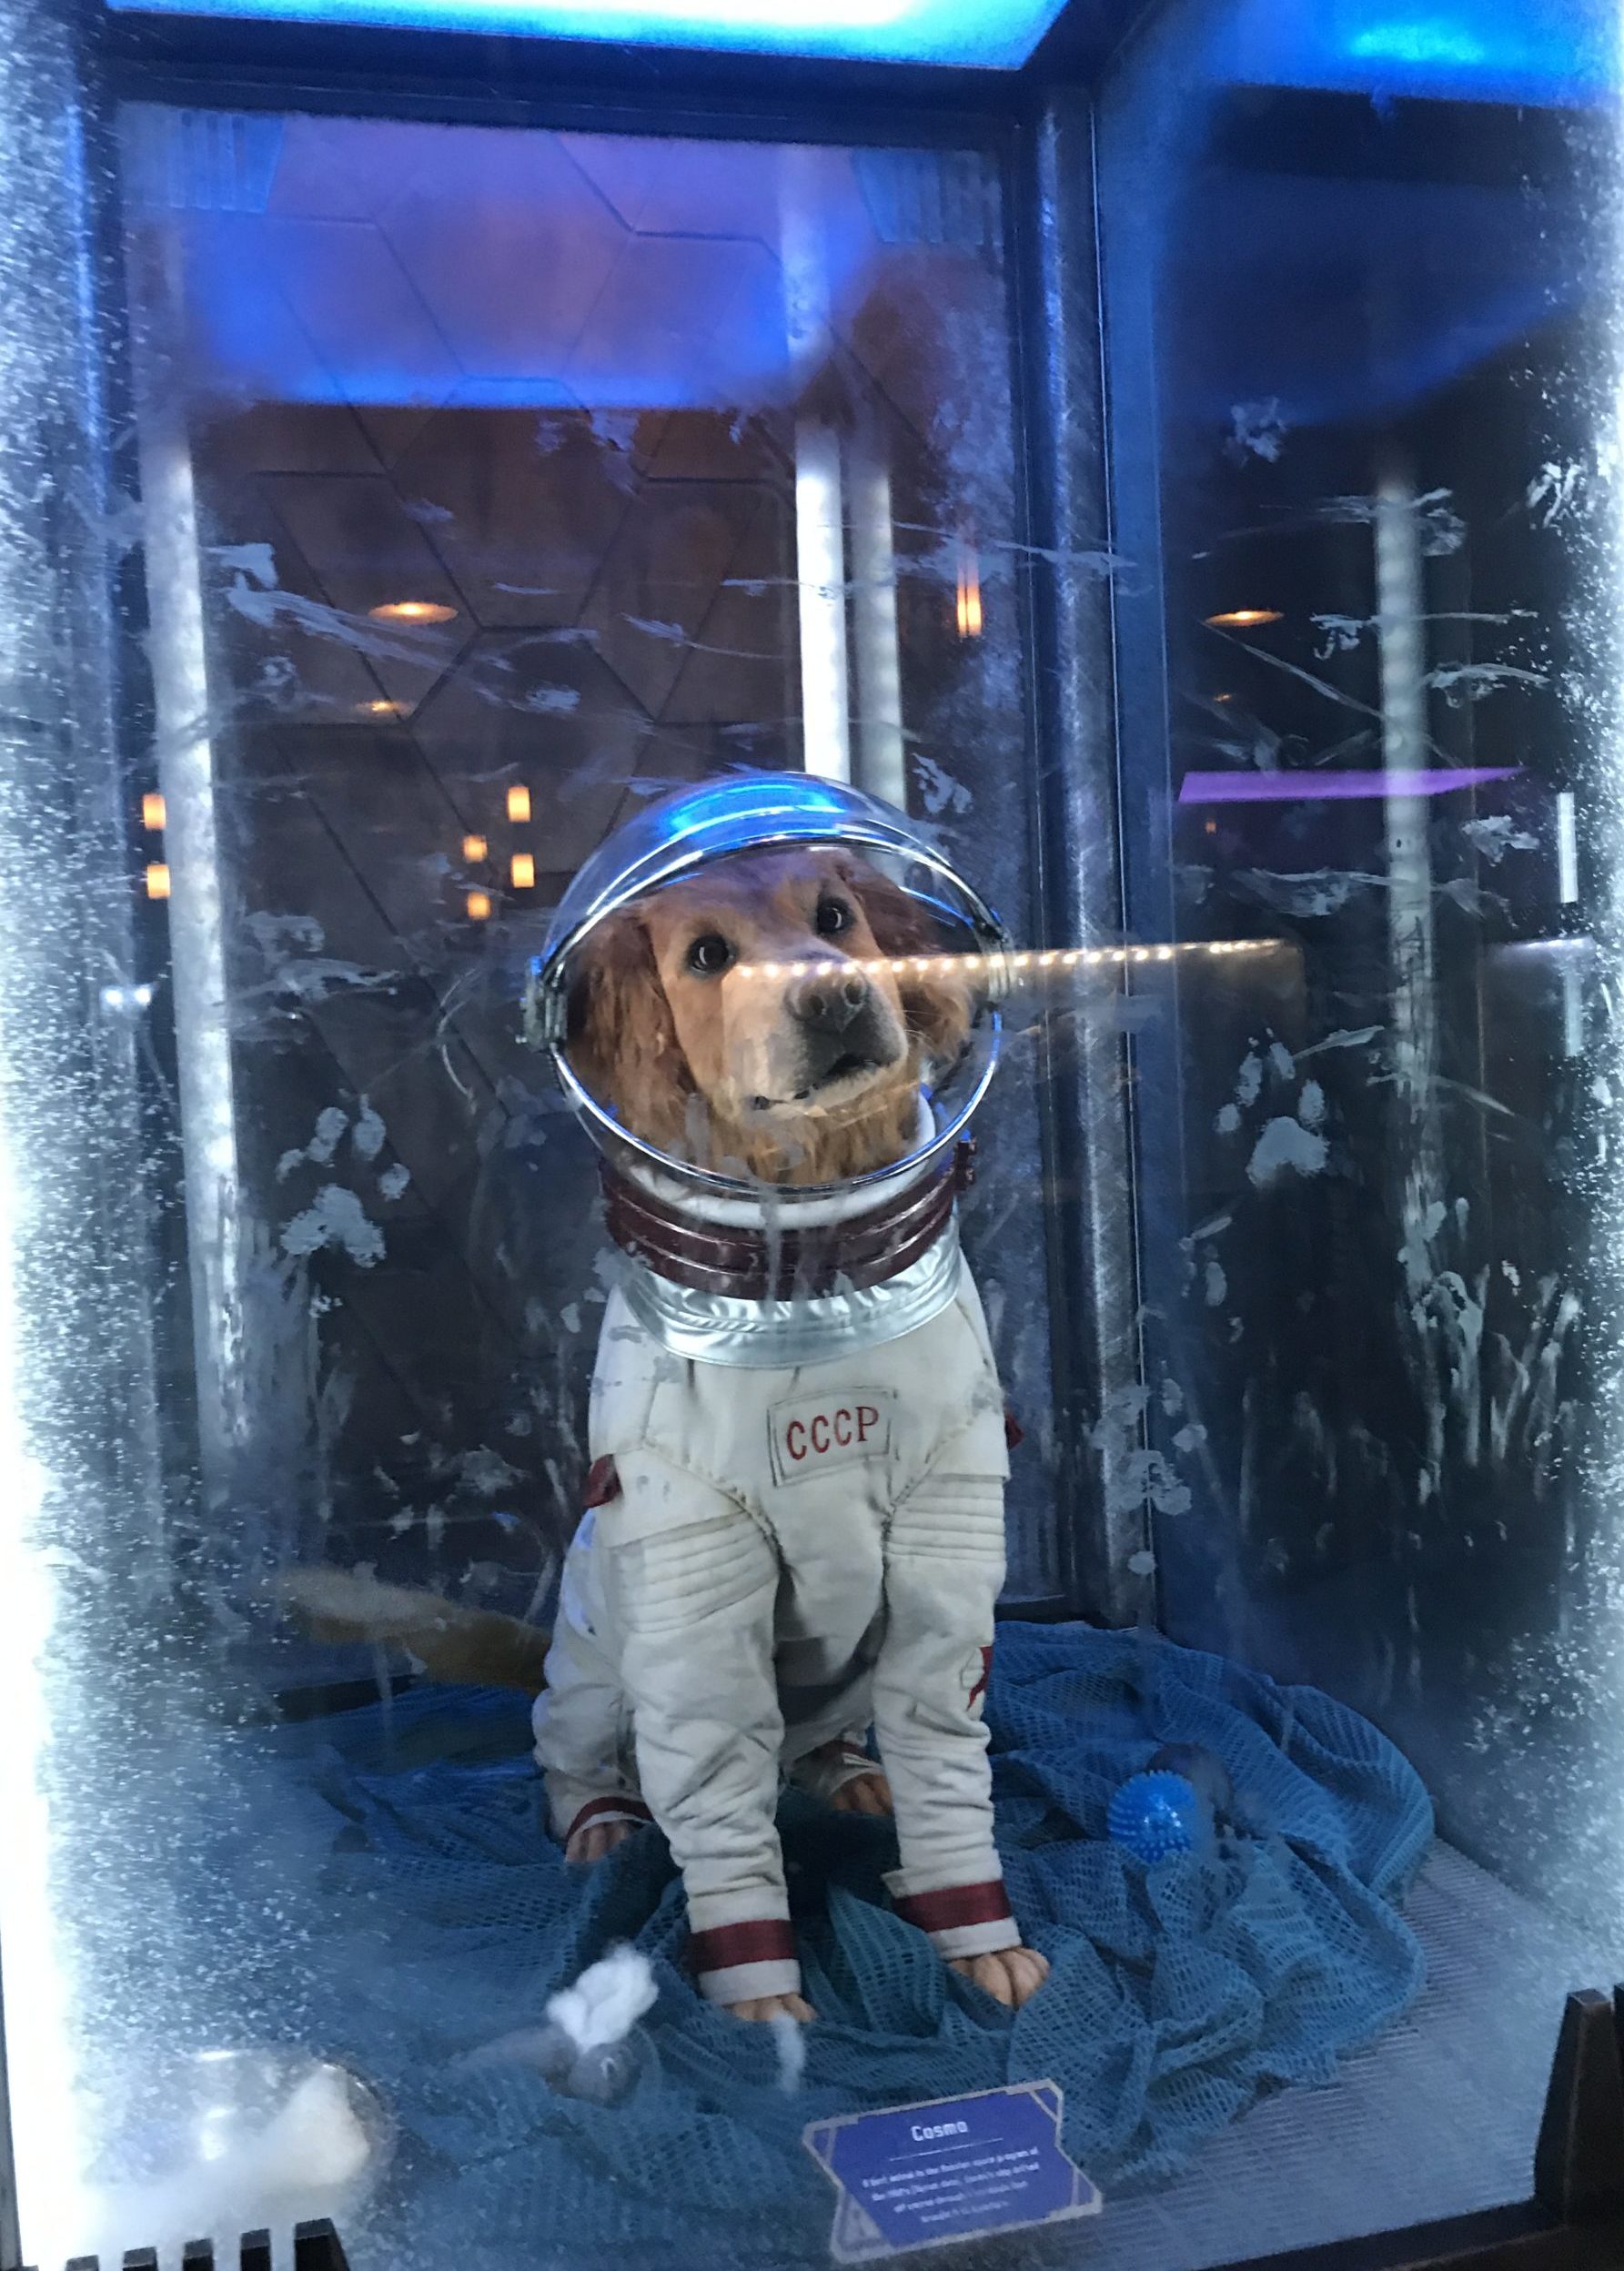 Cosmo at Mission Breakout